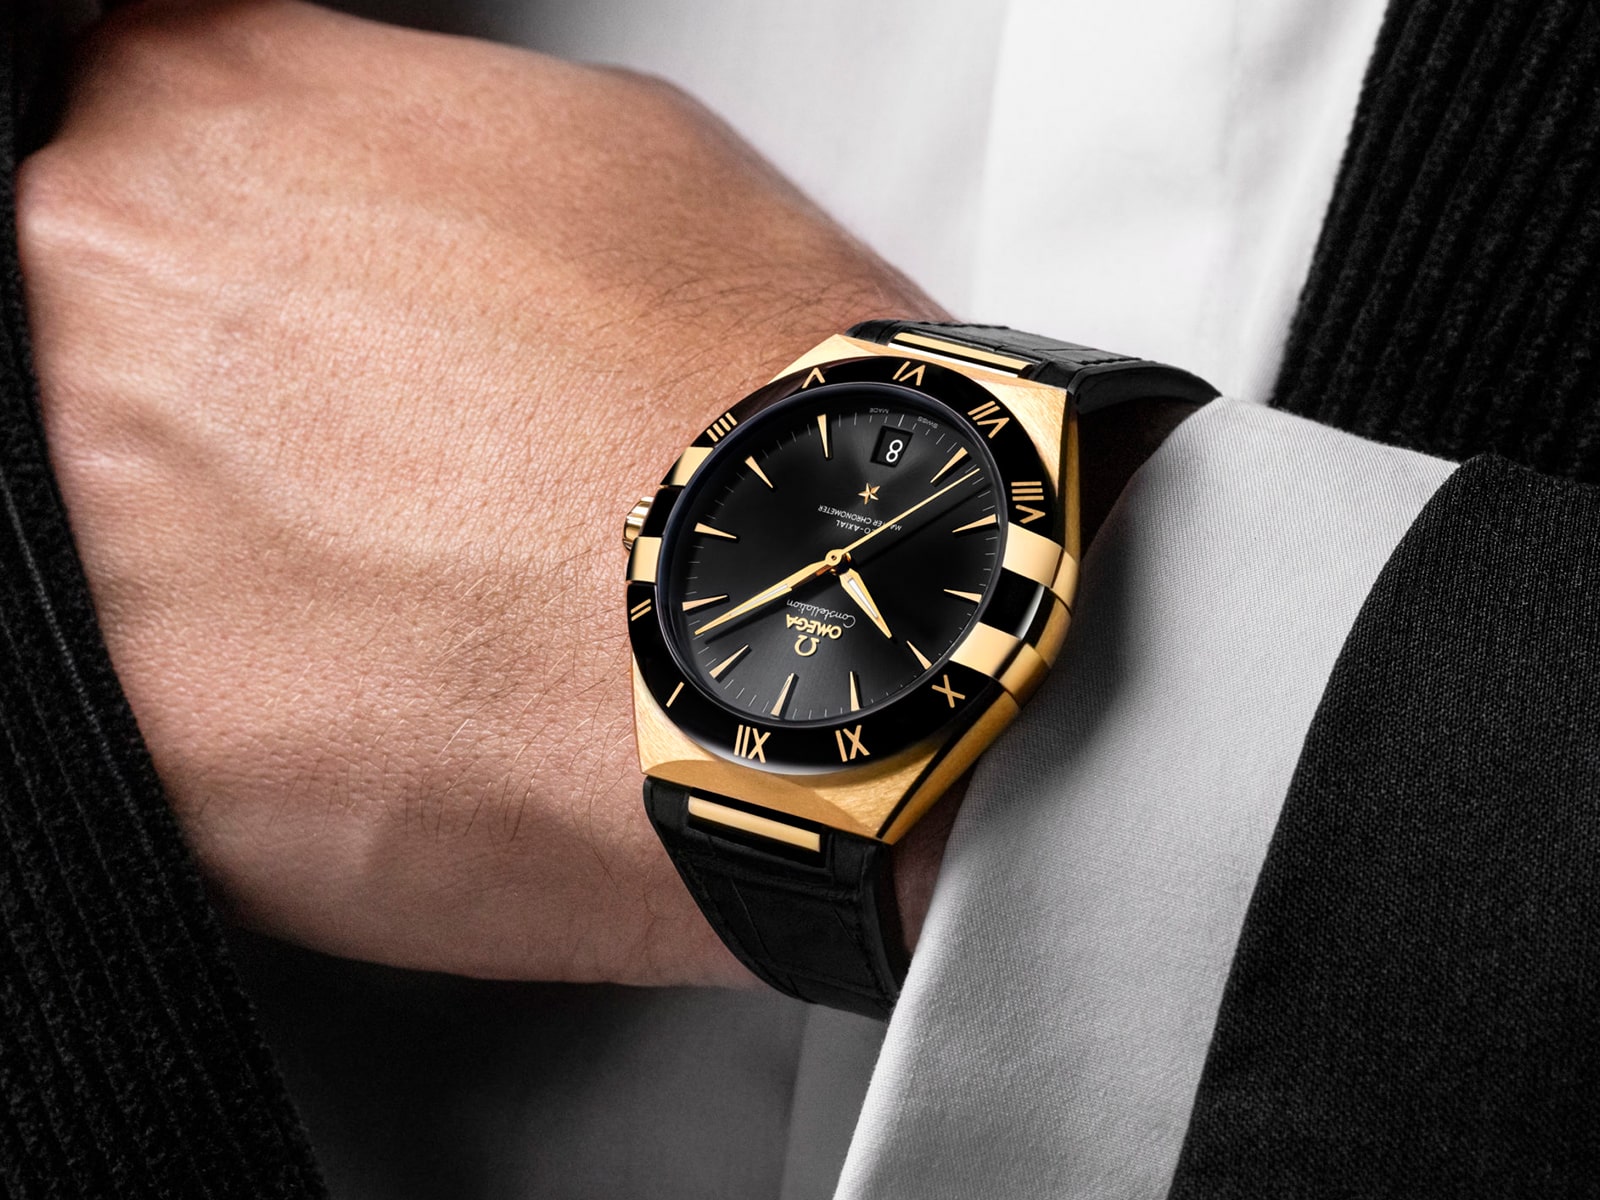 The 18k gold fake watch has a black dial.